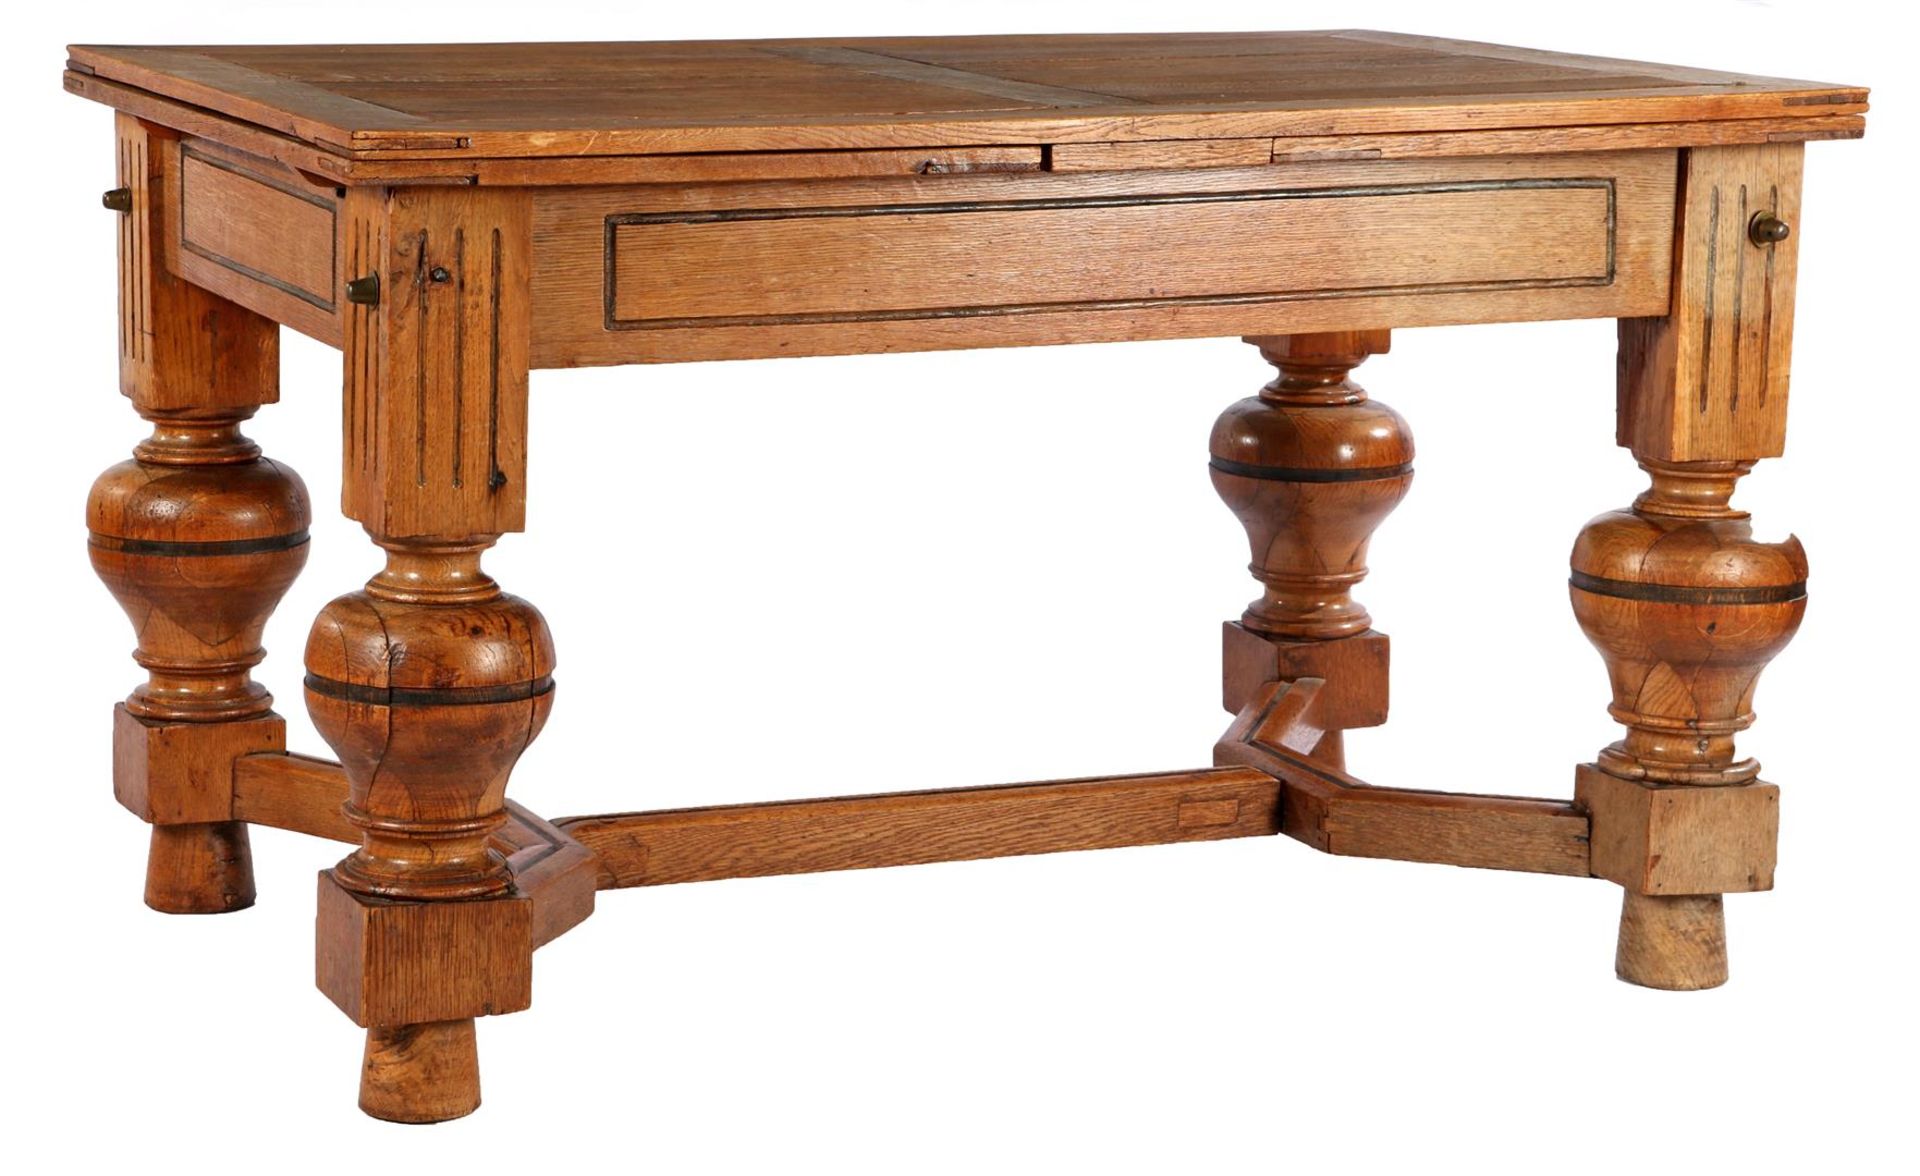 19th century Dutch solid white oak dining room table